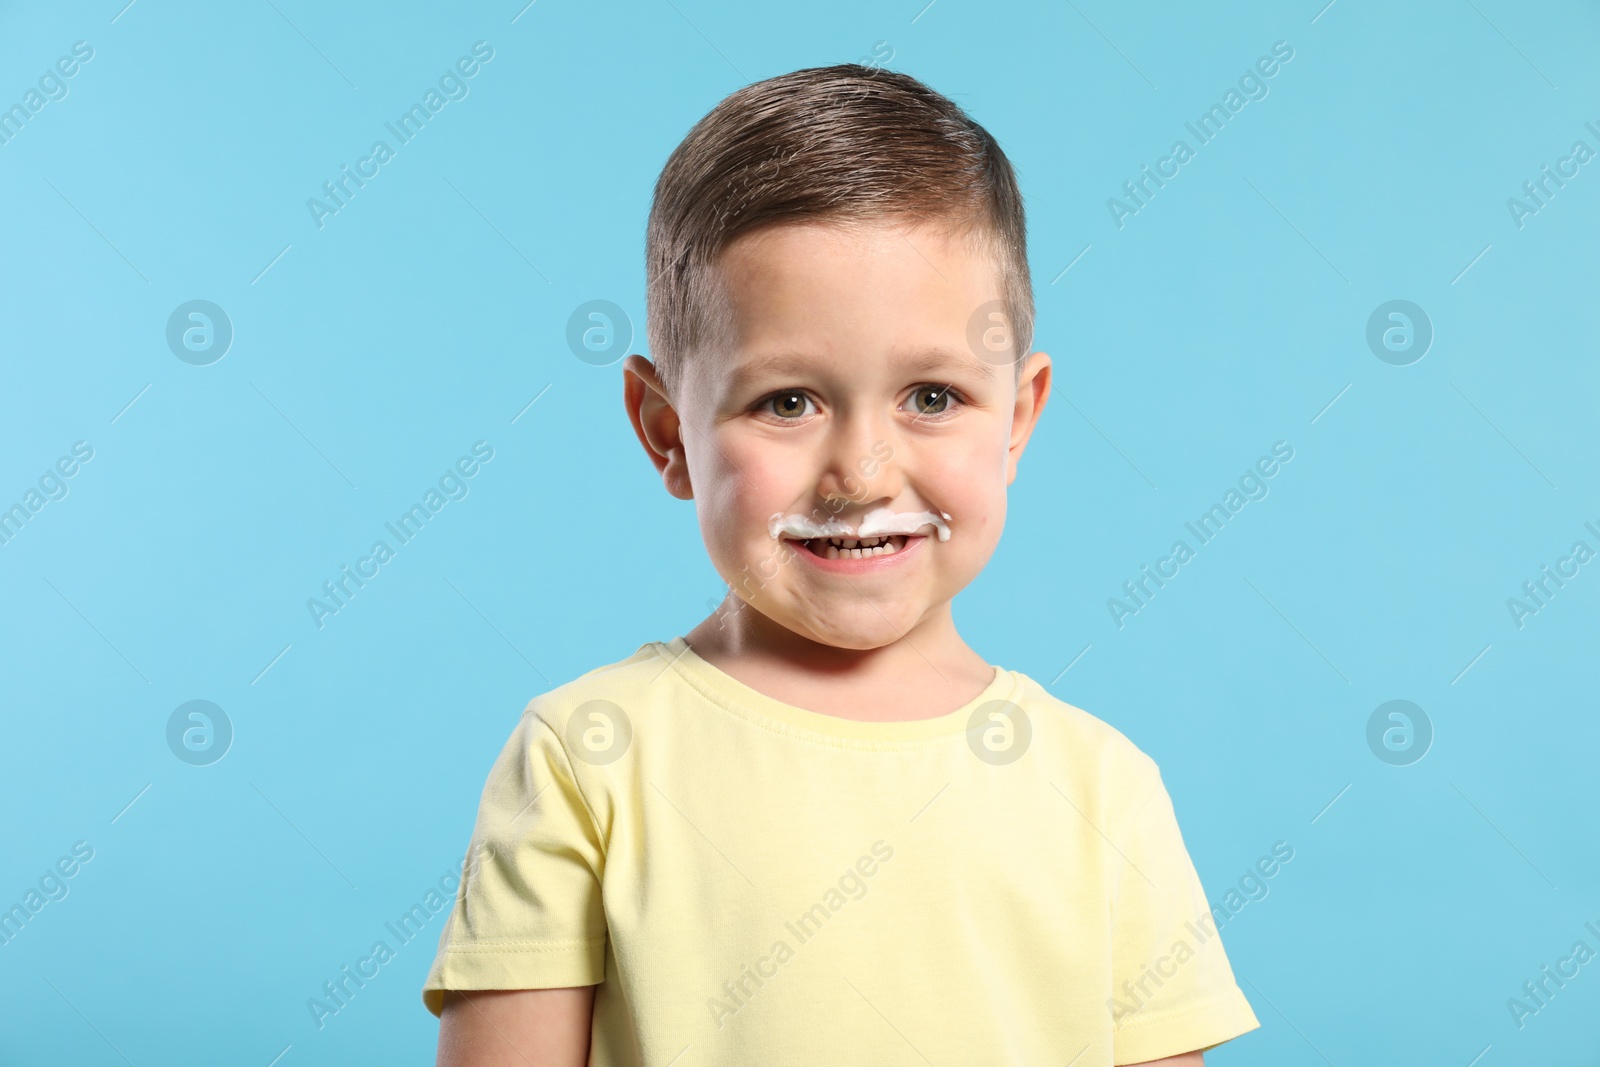 Photo of Cute boy with milk mustache on light blue background